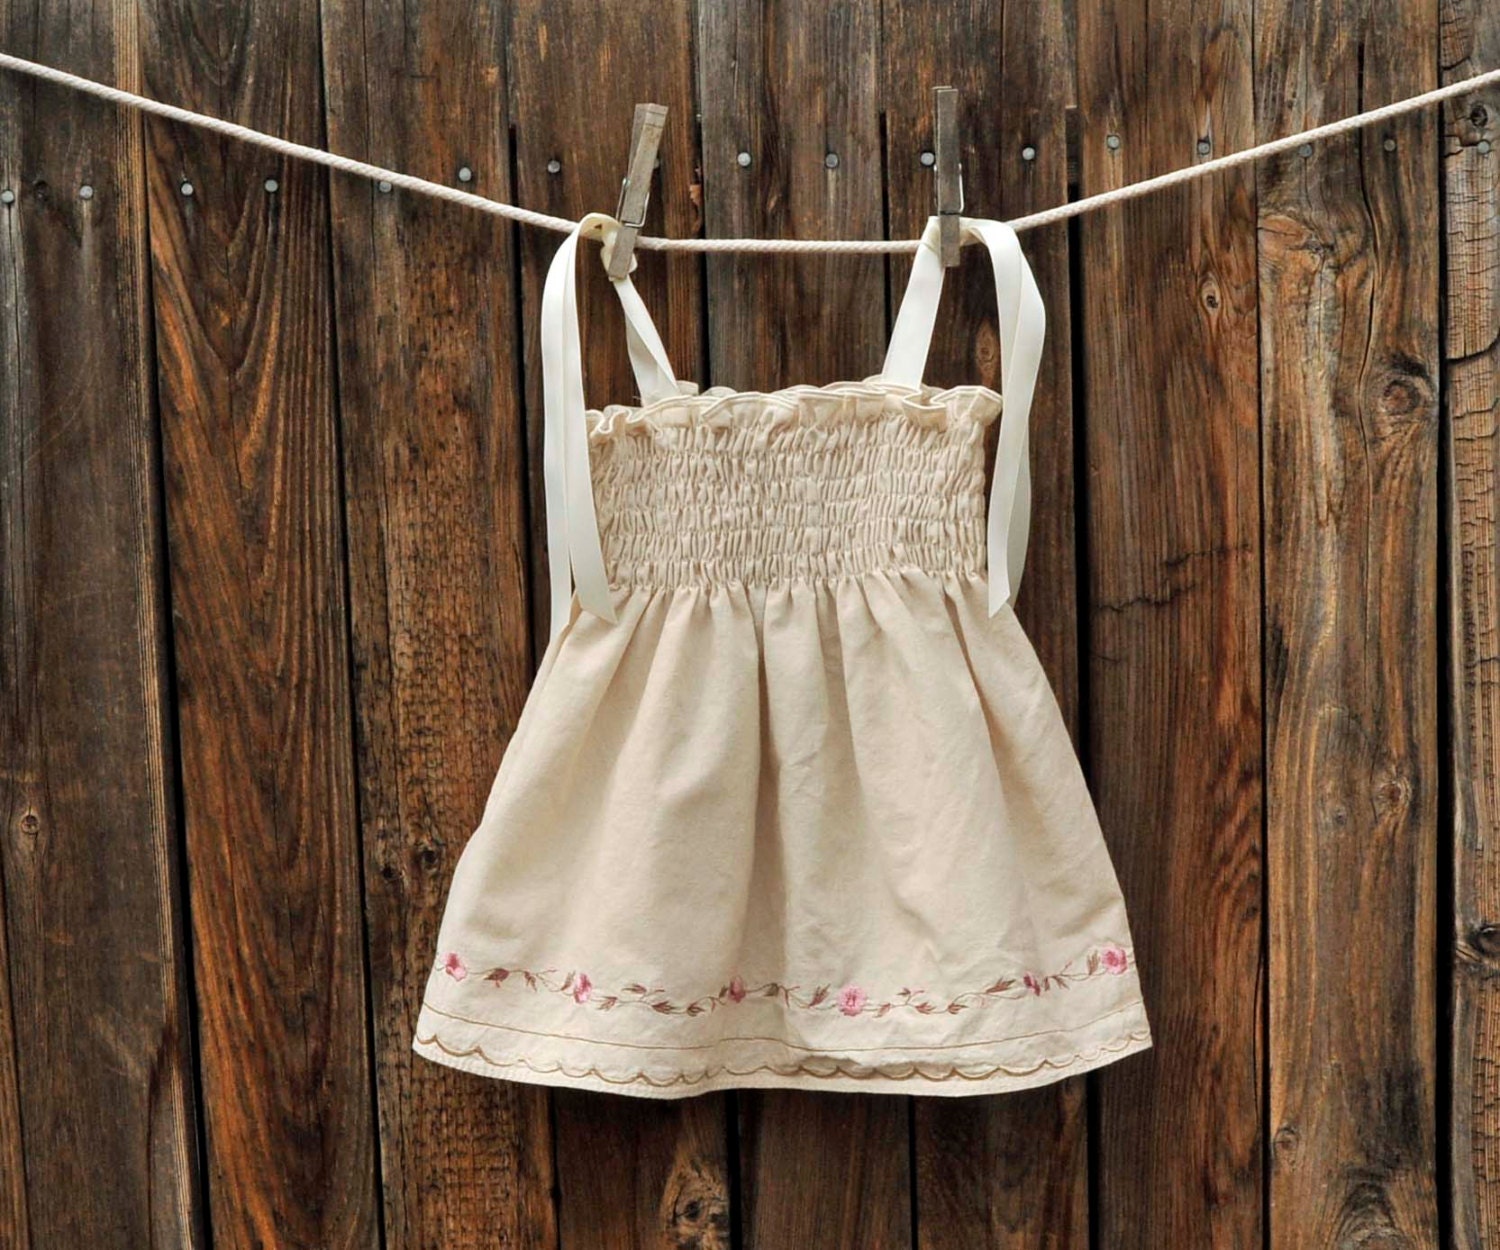 Embroidered Baby Dress, Cream and Pink Vintage dress ribbon ties, Great for beach weddings, portraits... 3m,6m,9m,12m,18m - SageNThymeDesigns